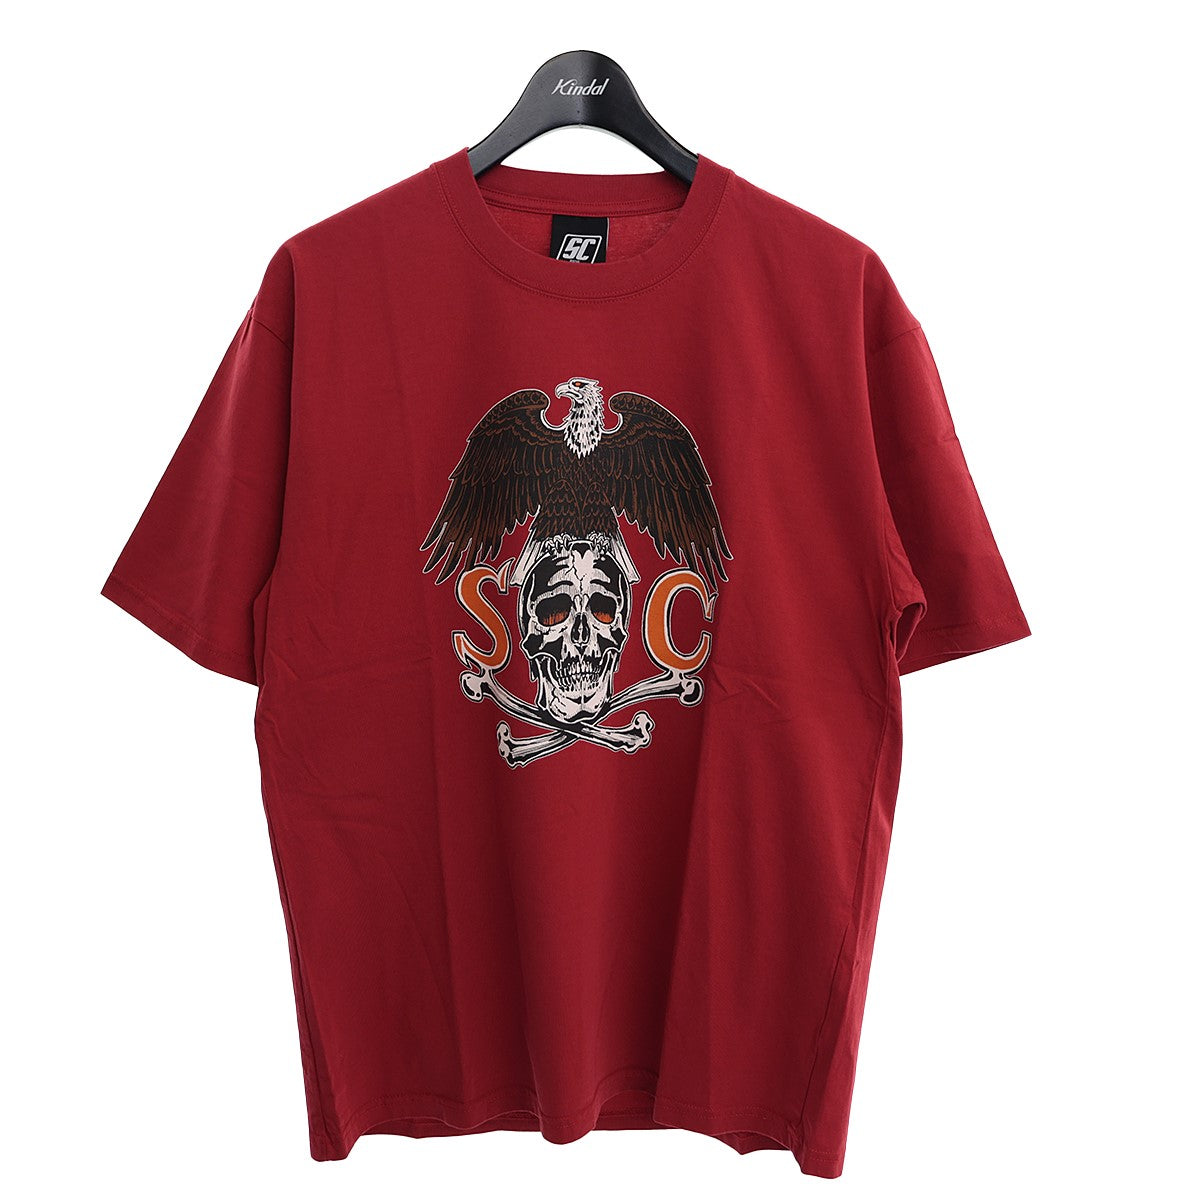 Subculture(サブカルチャー) SKULL EAGLE T プリントTシャツ SCST ...